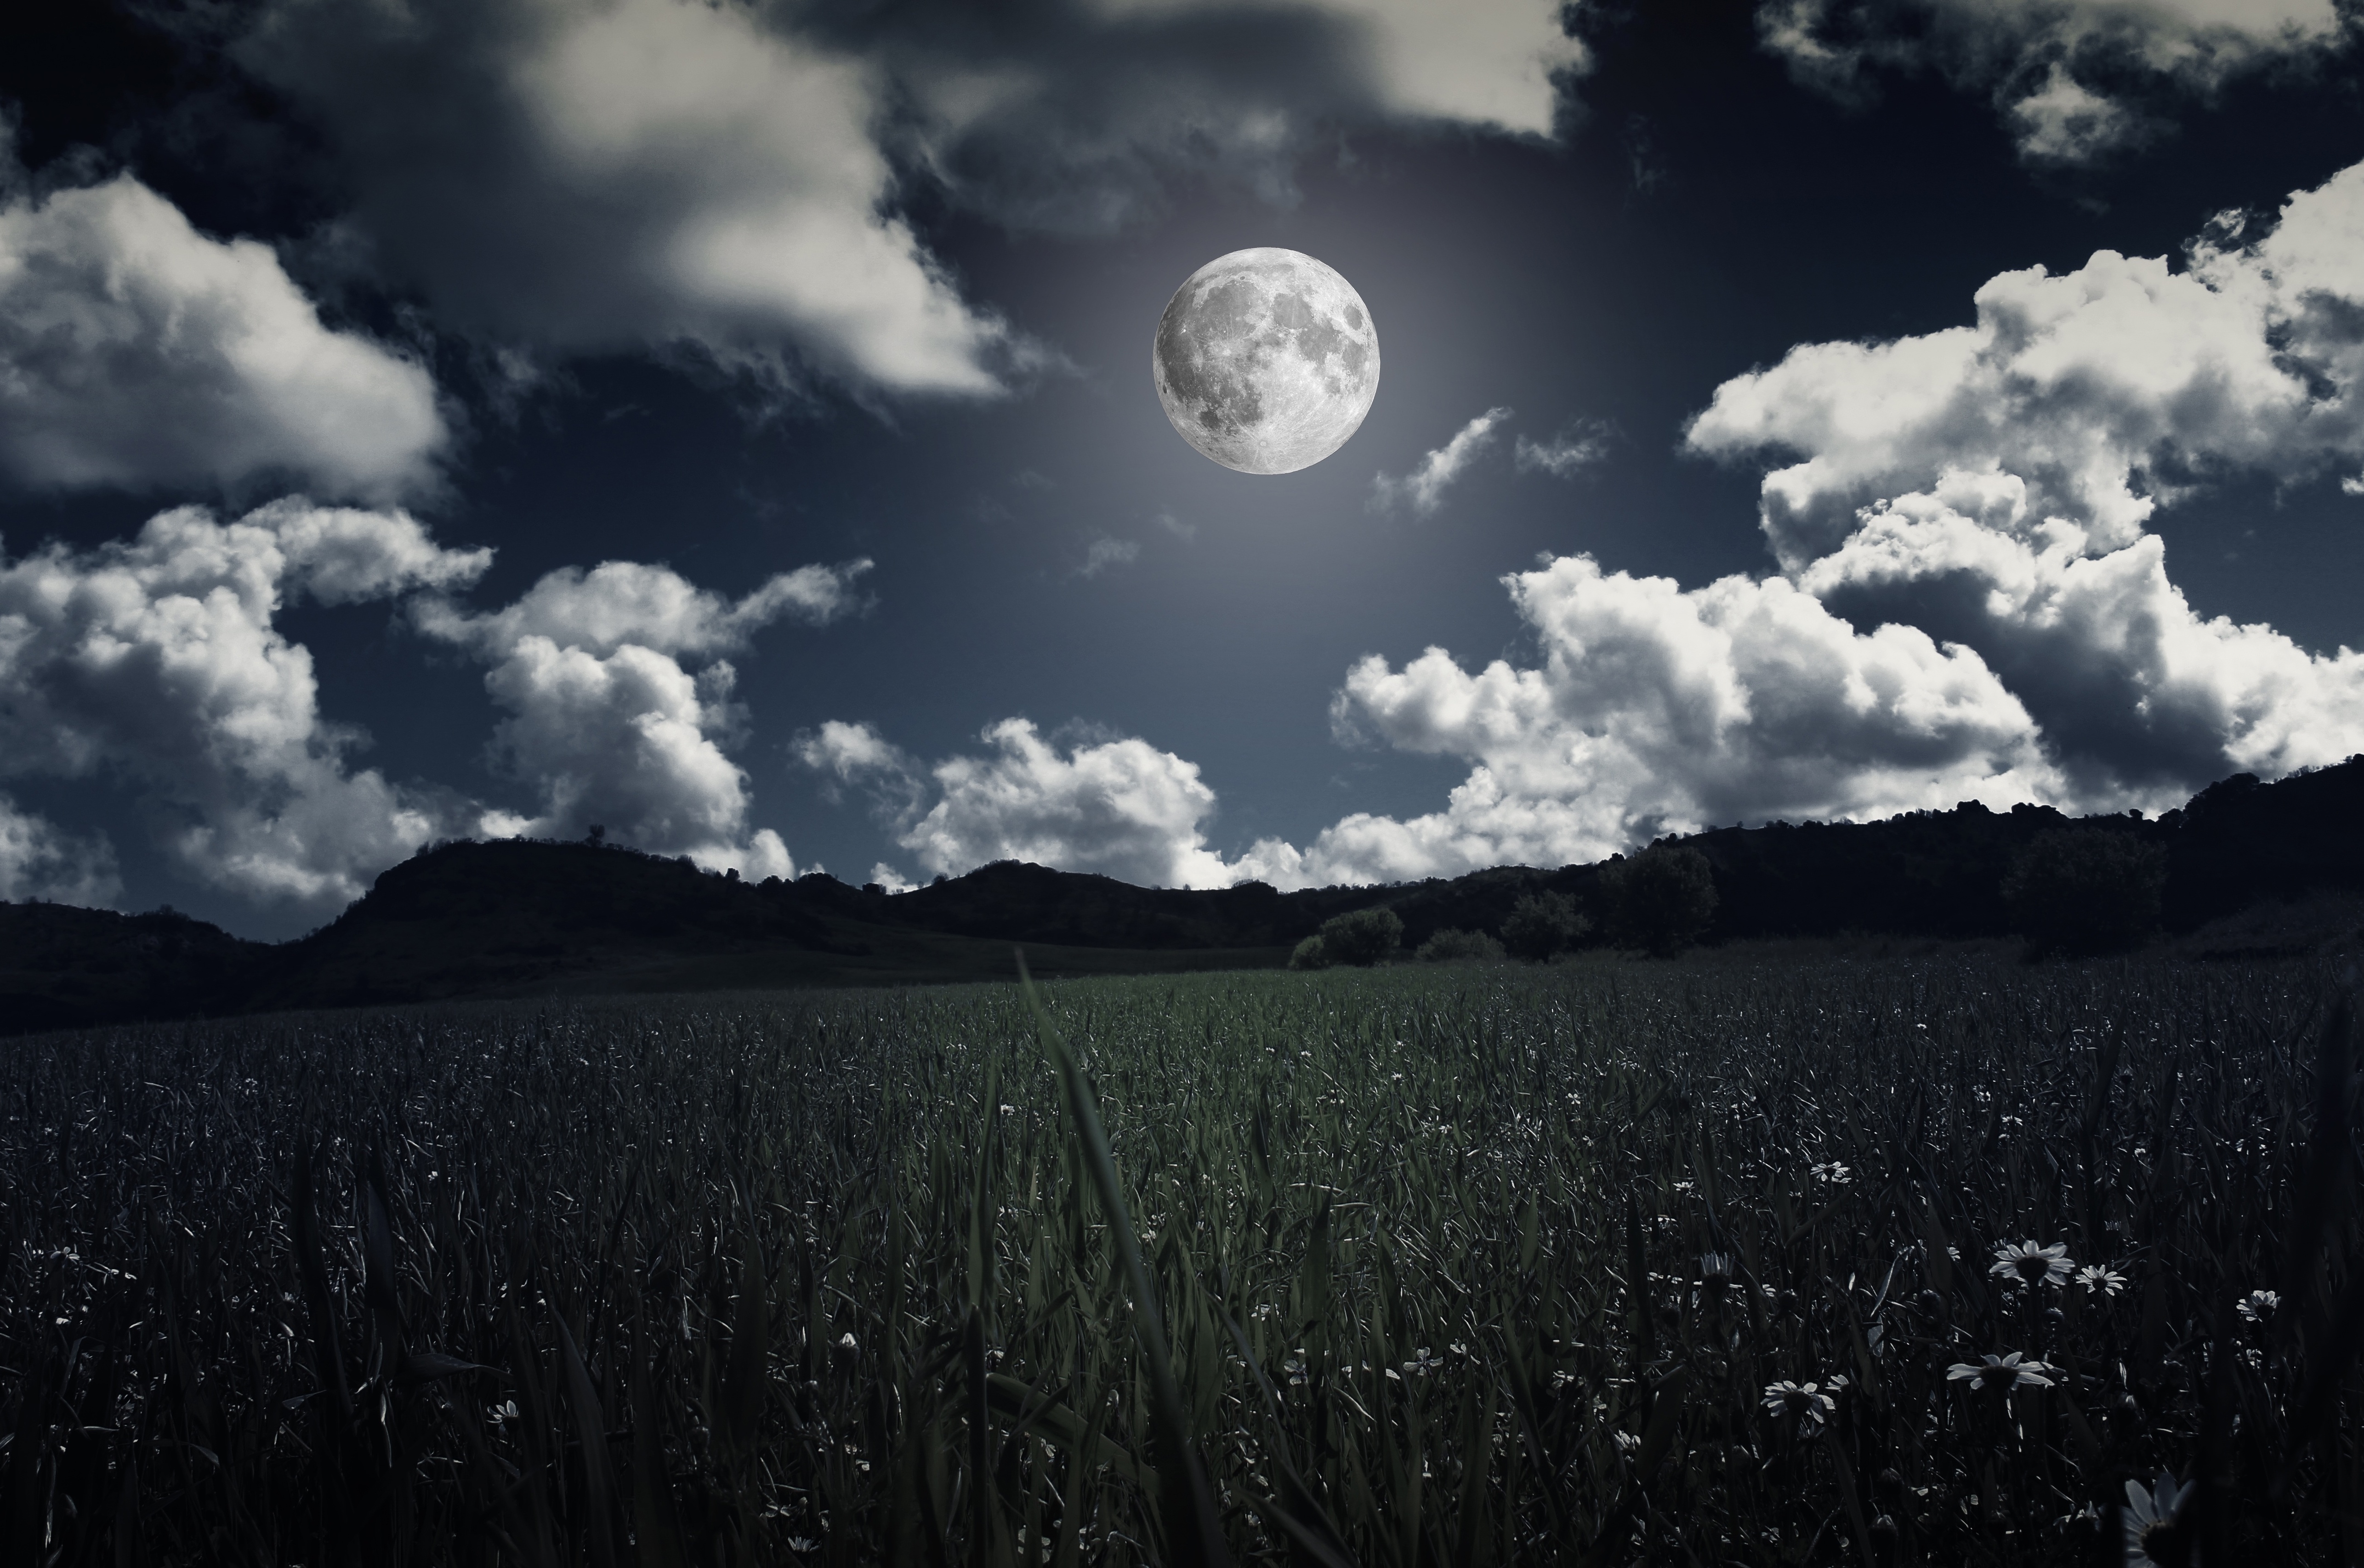 moon, full moon, grass, nature, clouds, field, photoshop wallpaper for mobile